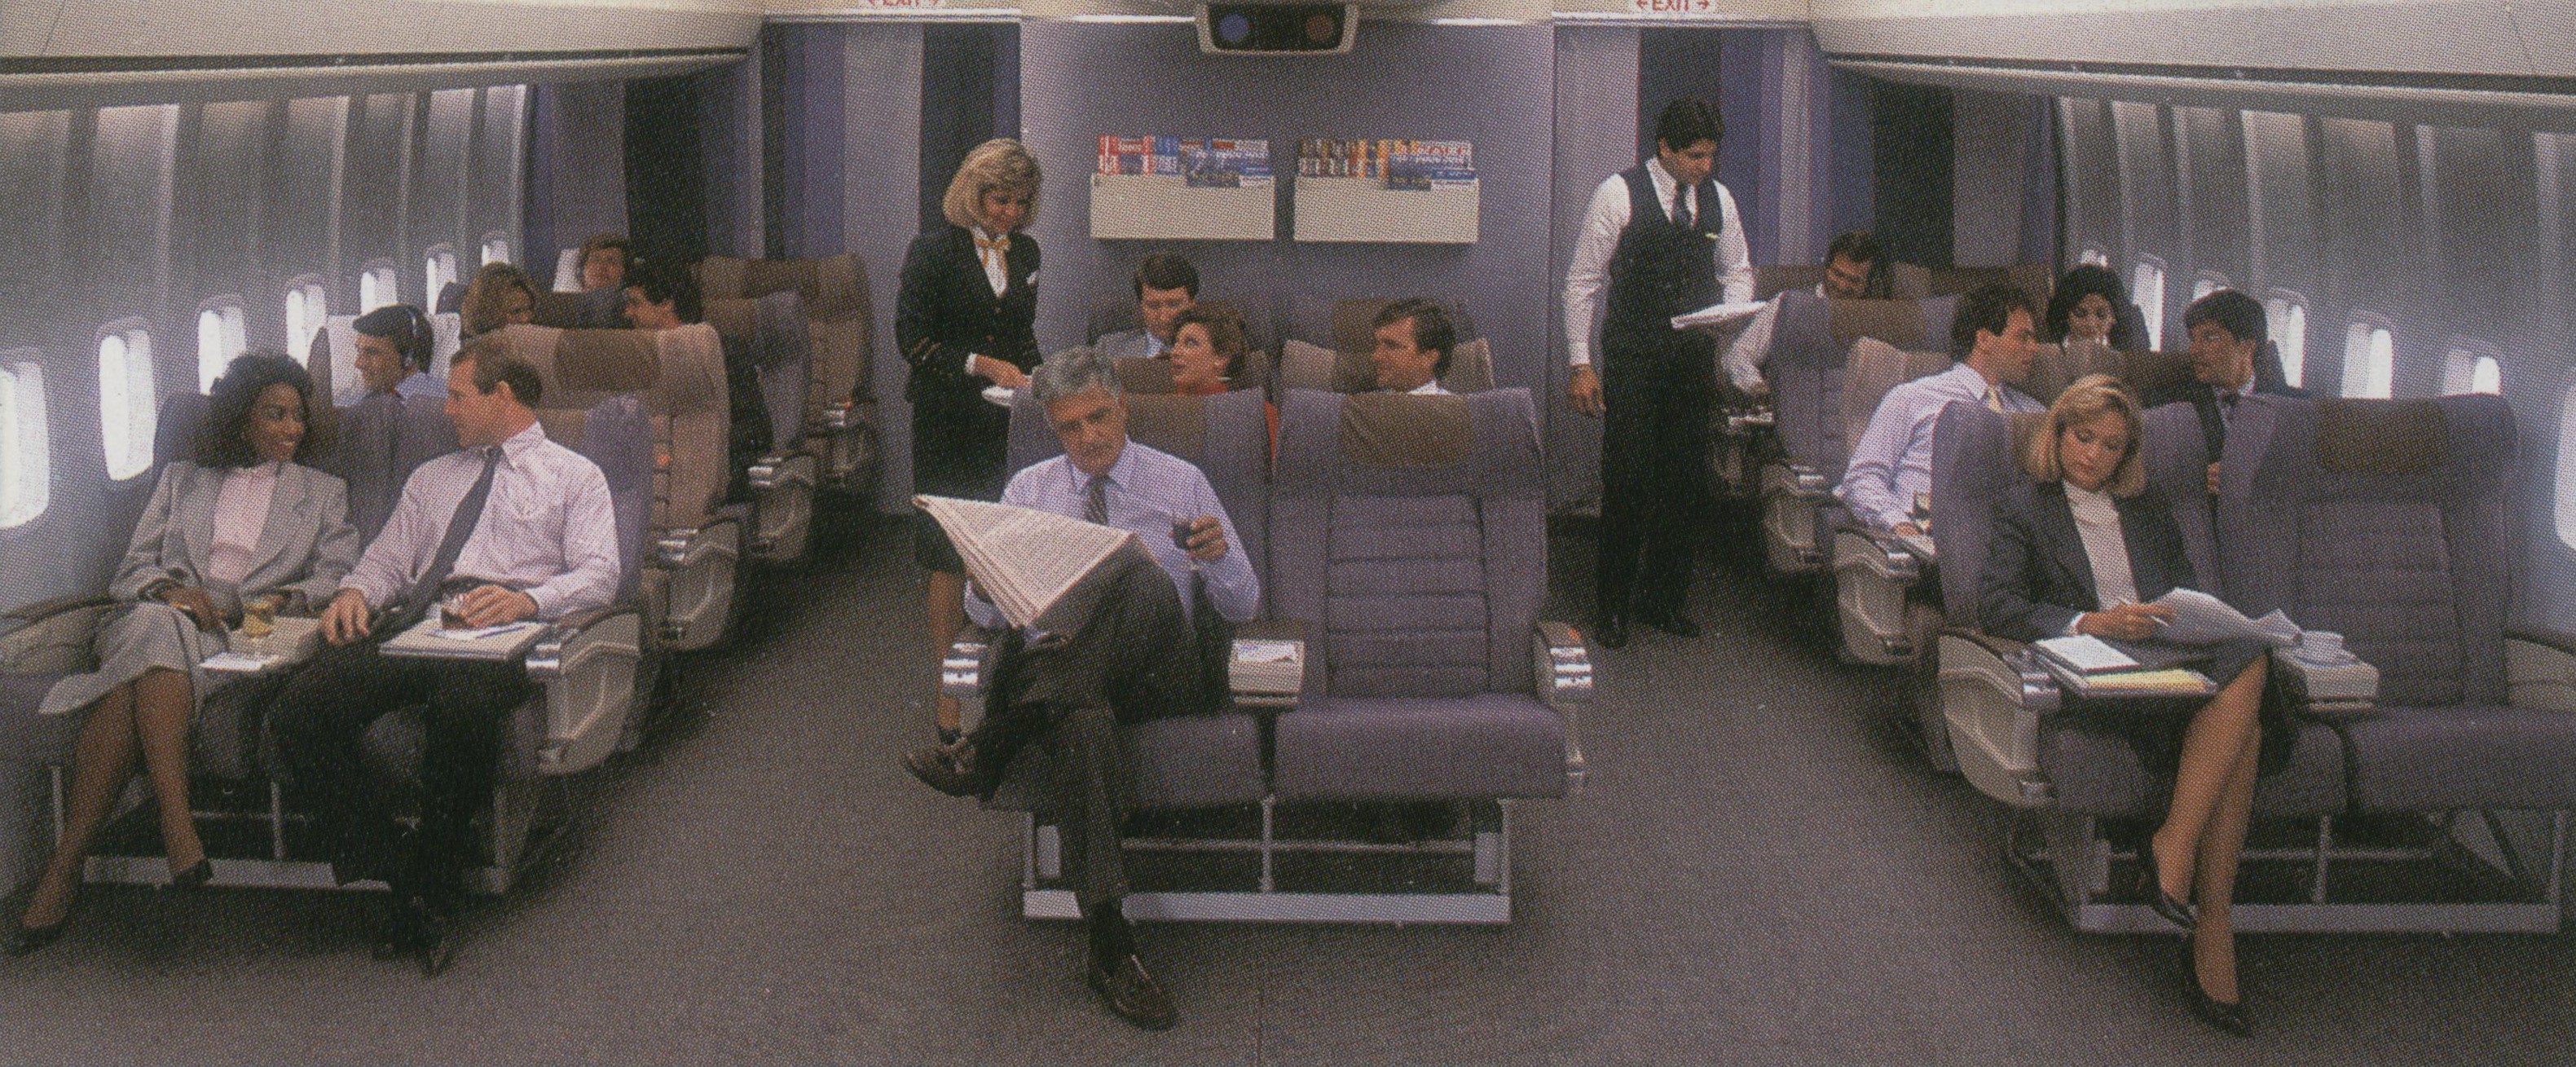 In the late 1980s Pan Am introduced a herringbone pattern for seat covers in Clipper Class (Business Class).  The coverings came in two colors blue and beige.  Both colors can be seen in this photo.